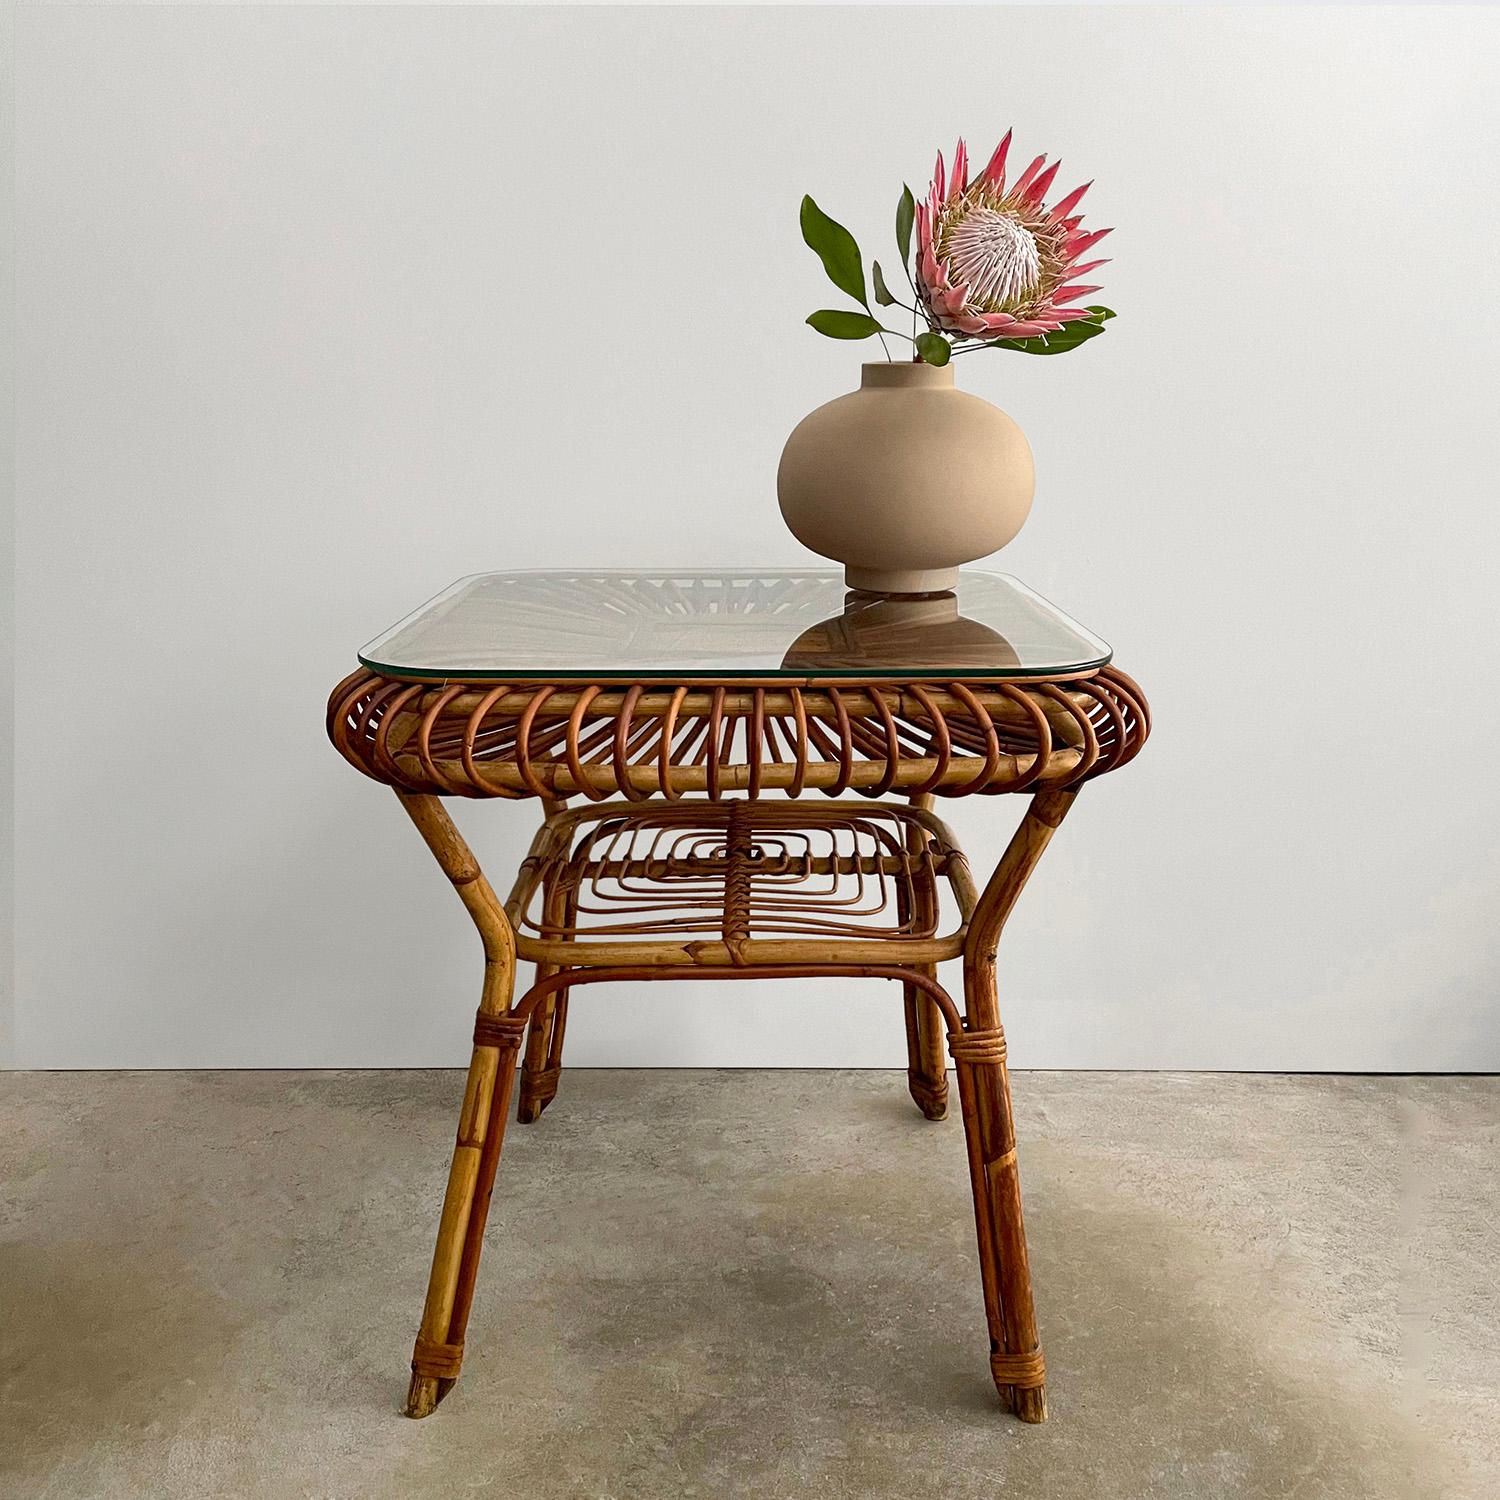 Italian bamboo & rattan table
Italy, 1960s 
Magnificent handcrafted artisanal piece with great attention to detail
Beautifully sculpted rattan reeds radiating from the center axis encompass the solid bamboo frame
New glass has been added to increase